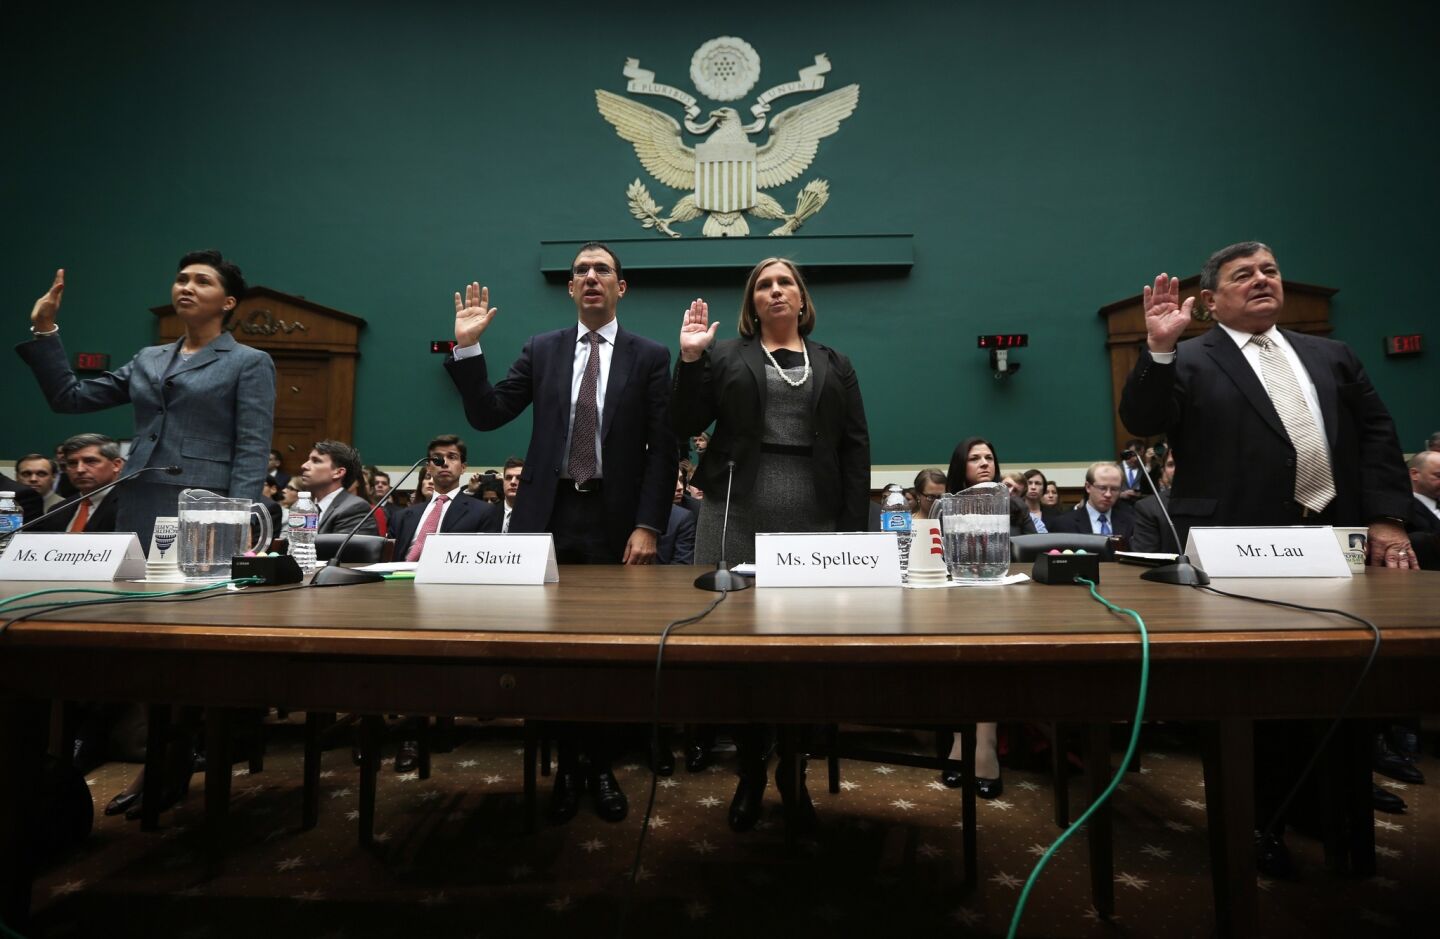 Cheryl Campbell, senior vice president of CGI Federal; Andrew Slavitt, group executive vice president for Optum/QSSI; Lynn Spellecy, corporate counsel for Equifax Workforce Solutions; and John Lau, program director for Serco, from left, are sworn in at a hearing on implementation of the Affordable Care Act before the House Energy and Commerce Committee.